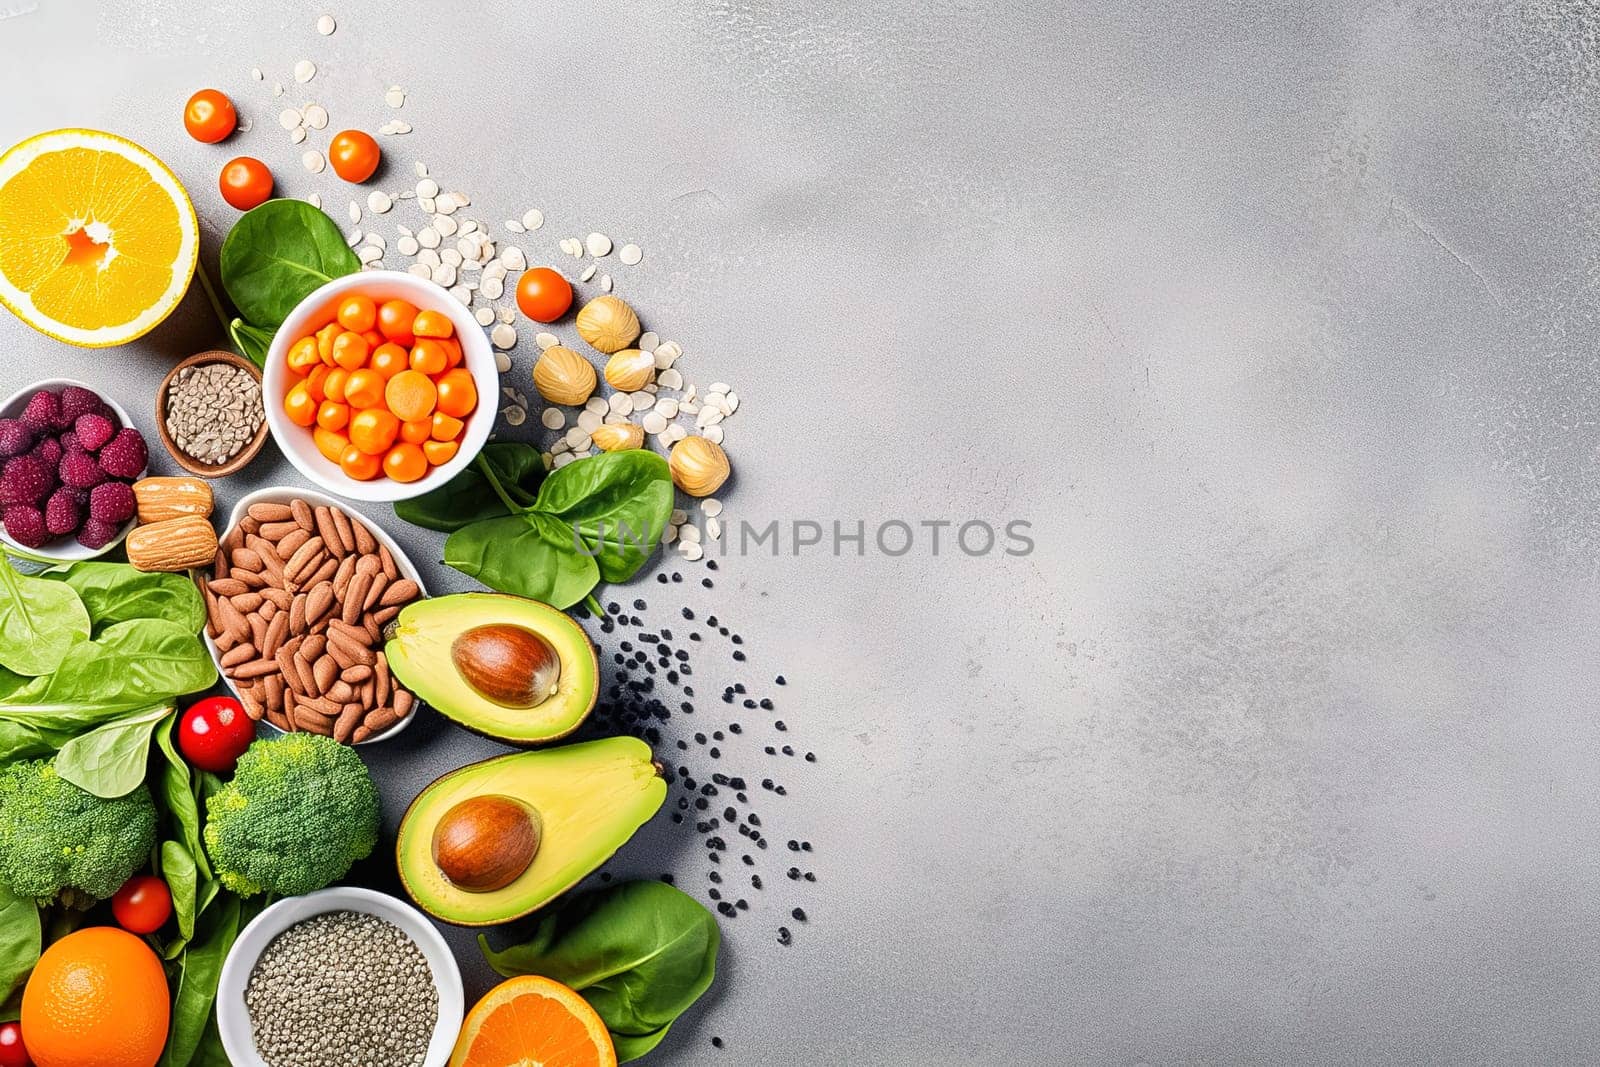 Assortment of spices, fruits, vegetables and nuts with empty space to insert text. High quality photo